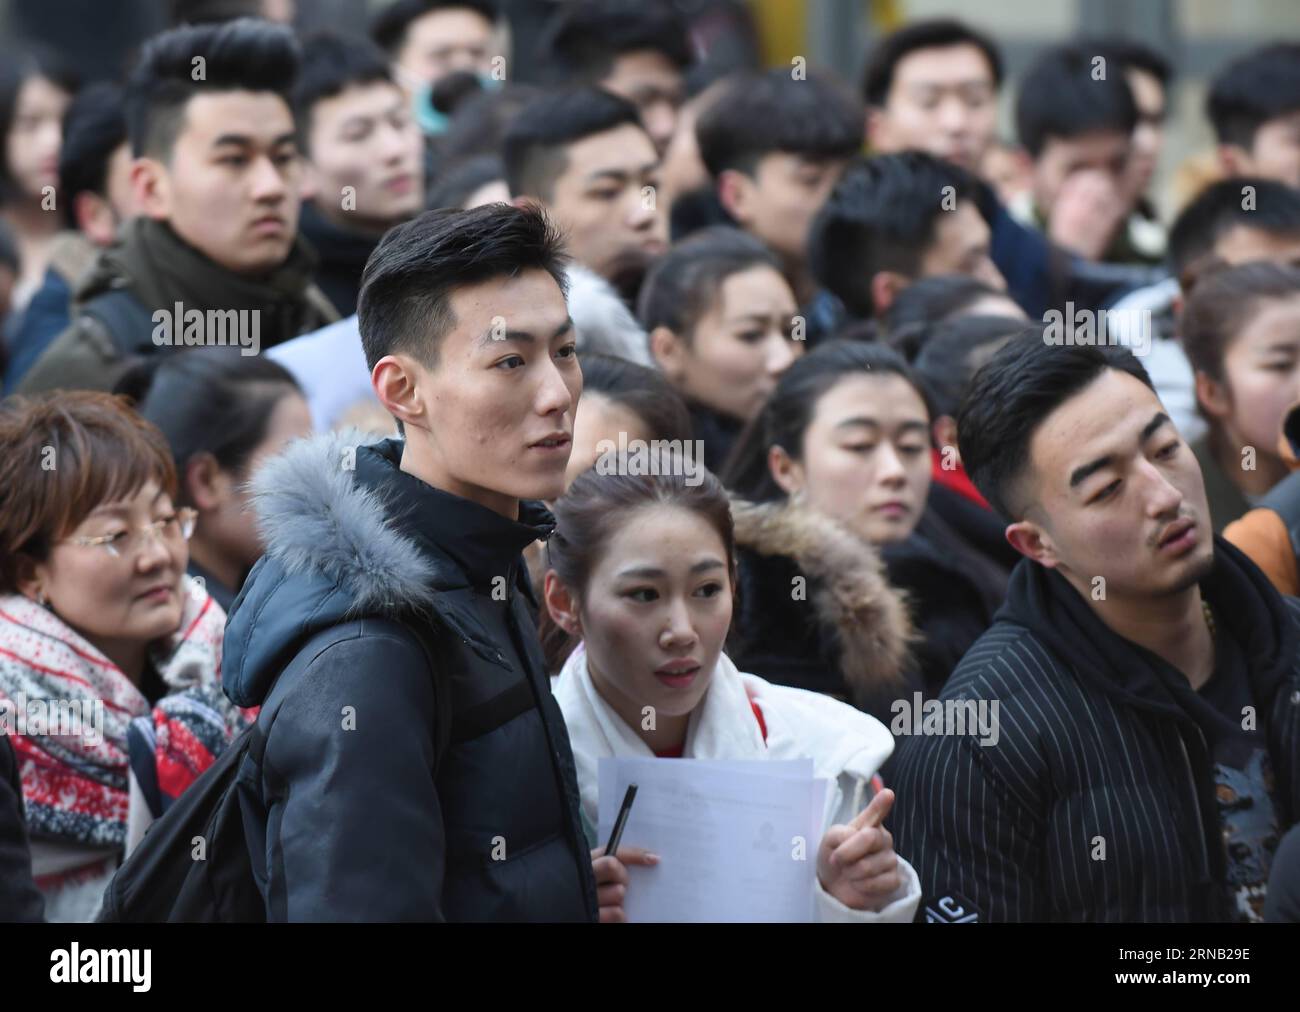 Candidates wait outside the examination hall at Beijing Film Academy (BFA) in Beijing, capital of China, Feb. 15, 2016. The annual entrance exam of China s art colleges including BFA, the Central Academy of Drama and the Communication University of China started simultaneously on Monday. Over 7,600 applicants for BFA s performance institute will take part in the exam to vie for 45 vacancies in the institute. Some Chinese young people regarded studying in an art college as a shortcut to become famous in recent years. )(mcg) CHINA-BEIJING-ART PROFESSIONAL-EXAM (CN) LixWen PUBLICATIONxNOTxINxCHN Stock Photo